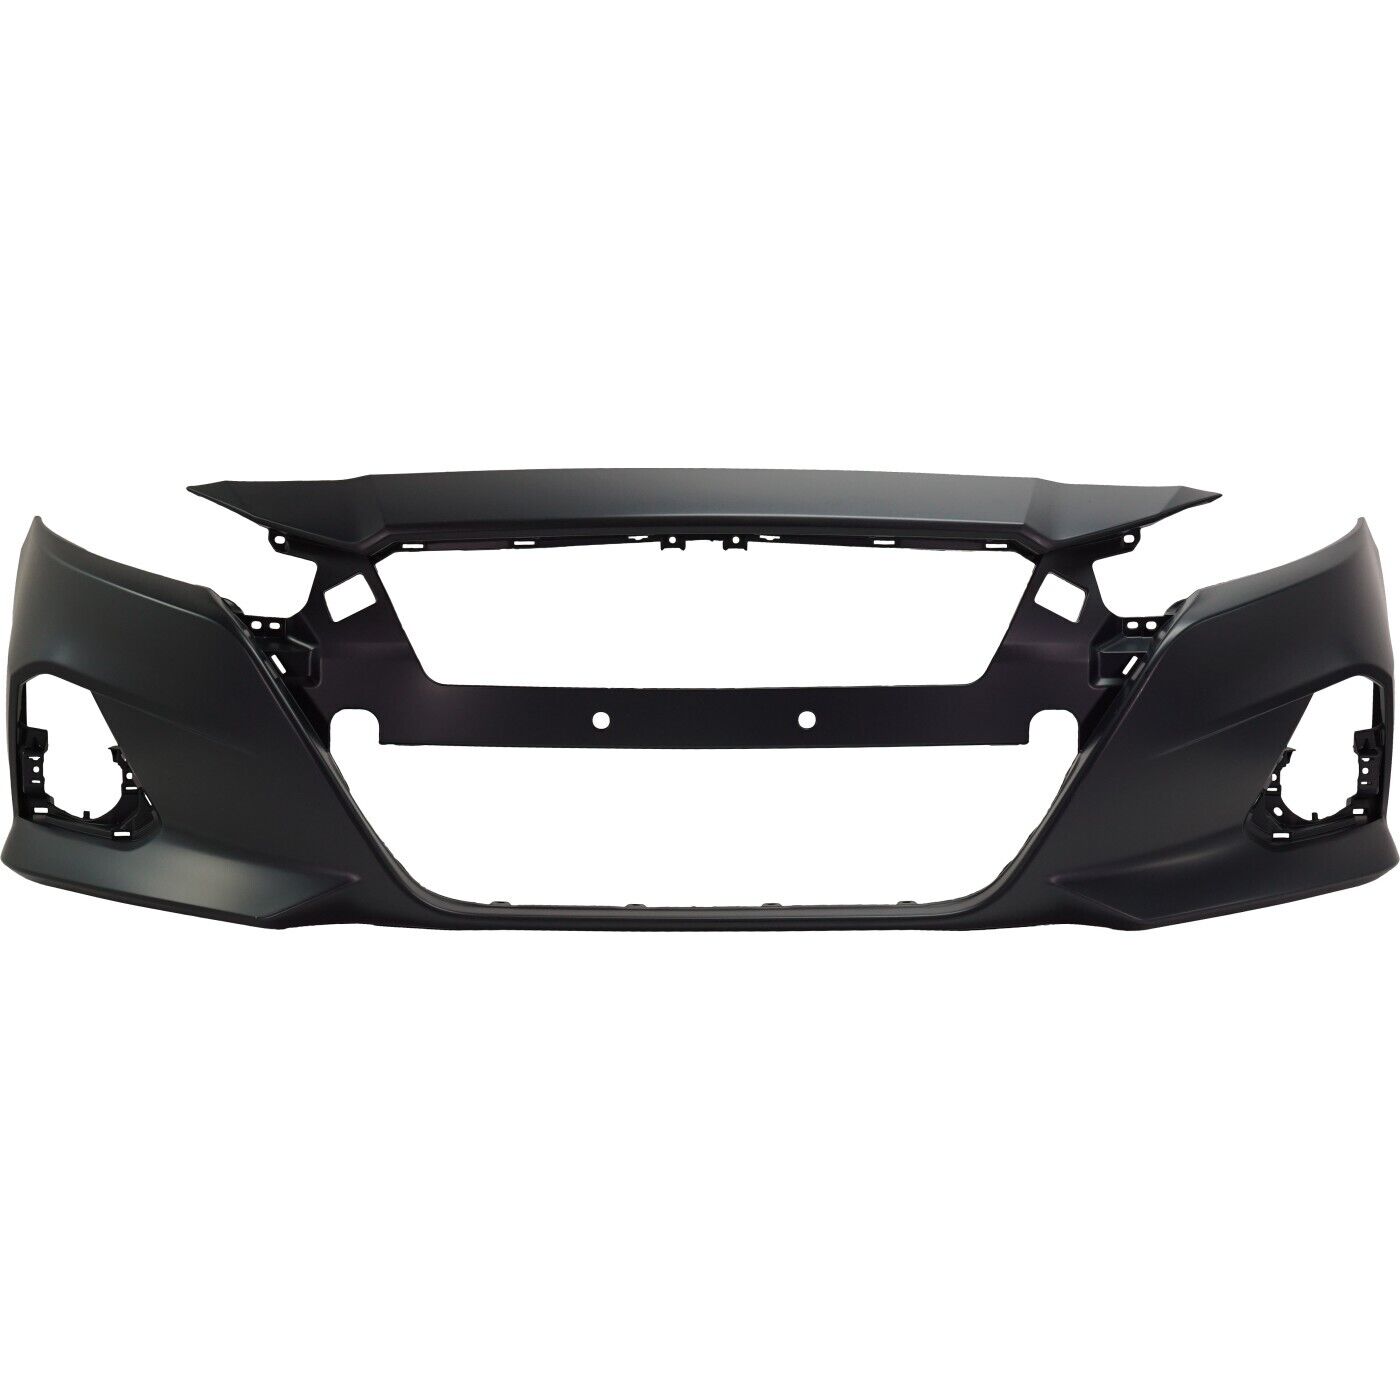 2019-2022 NISSAN ALTIMA; Front Bumper Cover; EDITION ONE/PLATINUM w/Camera Hole Painted to Match